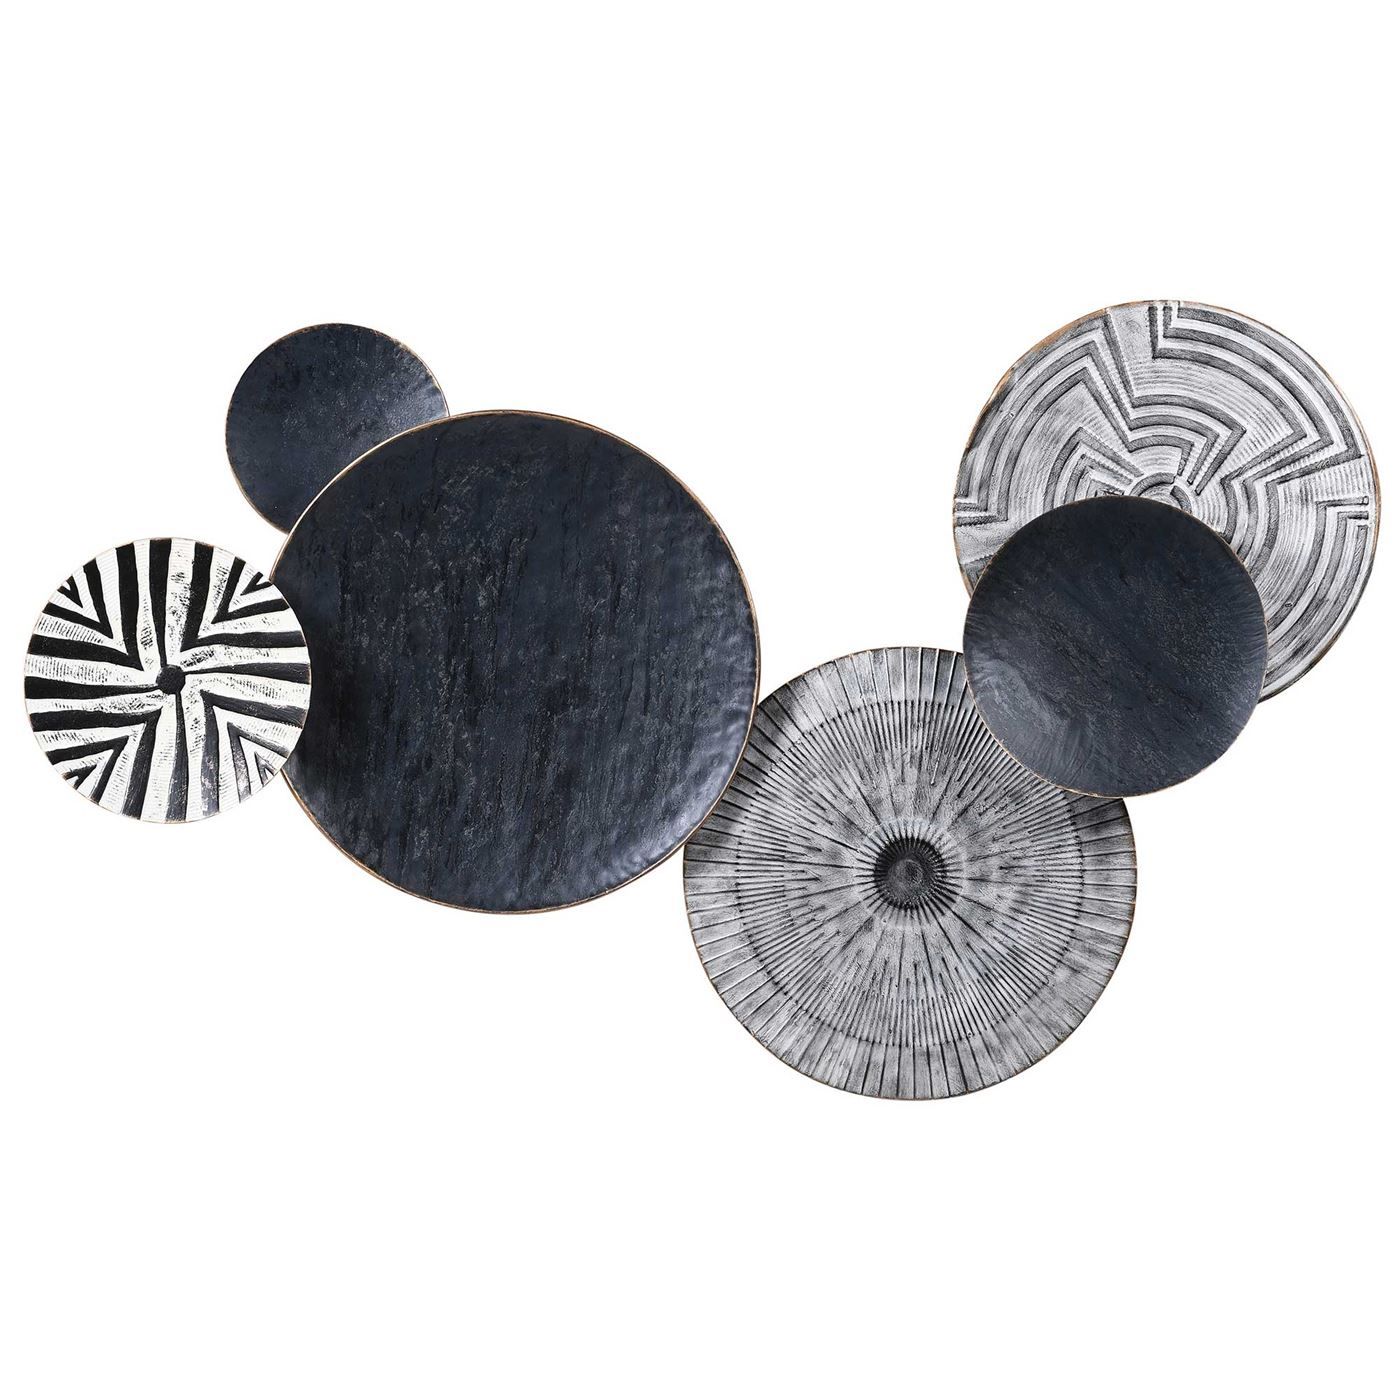 Decorative Circular Tribal Print Wall Art Black And White – Barker &  Stonehouse Intended For Tribal Pattern Wall Art (View 15 of 15)